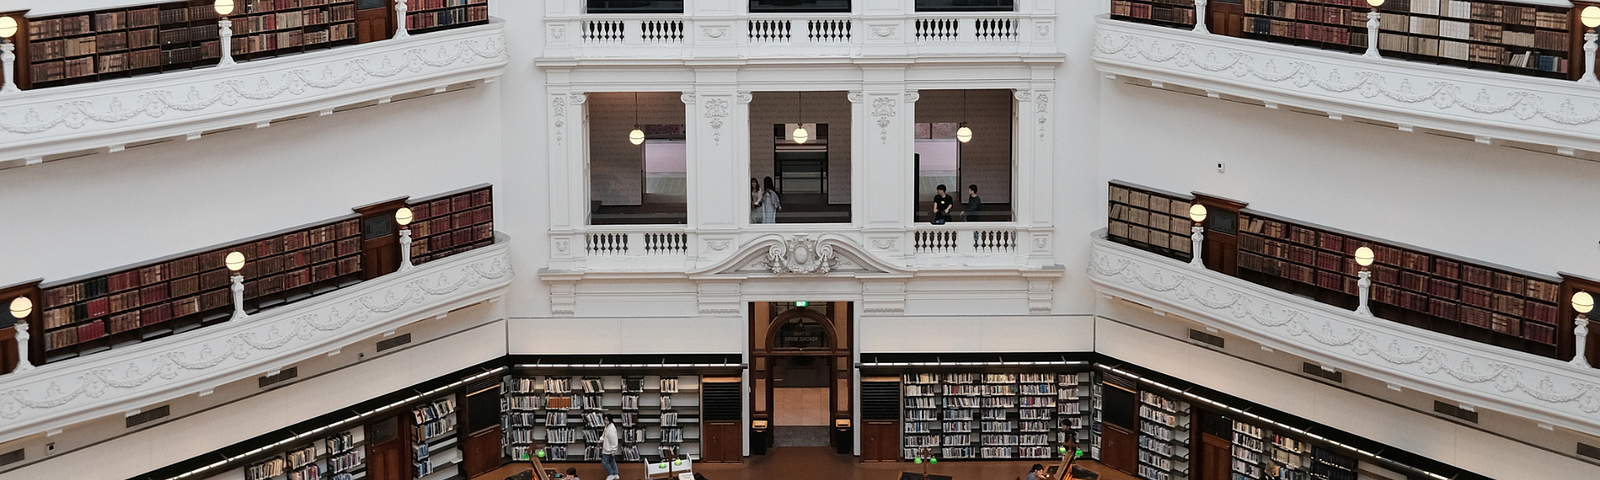 A photo of a grand library reading room with people working at desks and browsing books on shelves